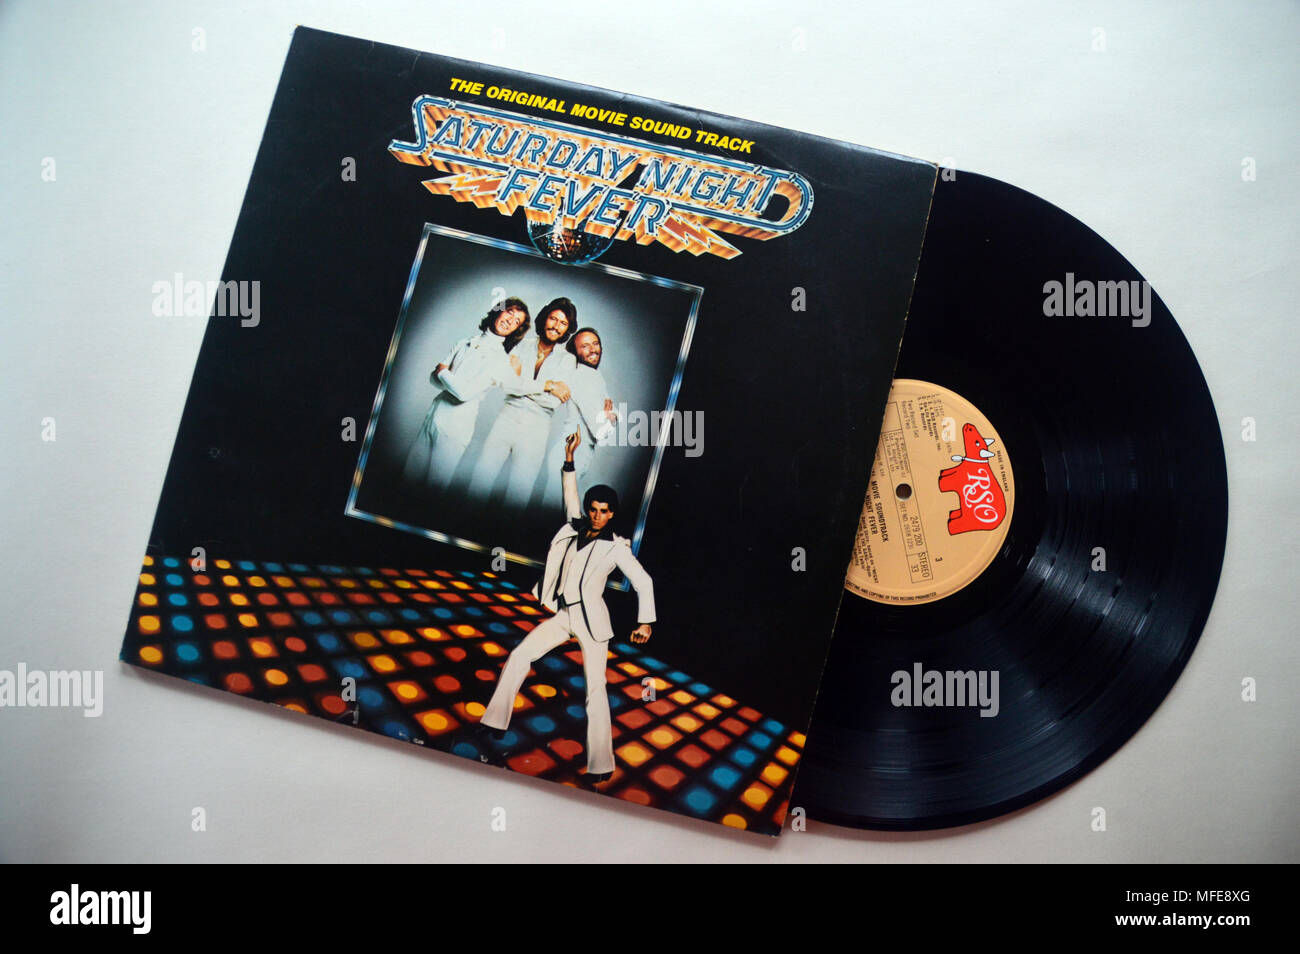 Bee Gees & John Travolta on the Double Album Sleeve Cover of Saturday Night Fever by RSO Records. Stock Photo